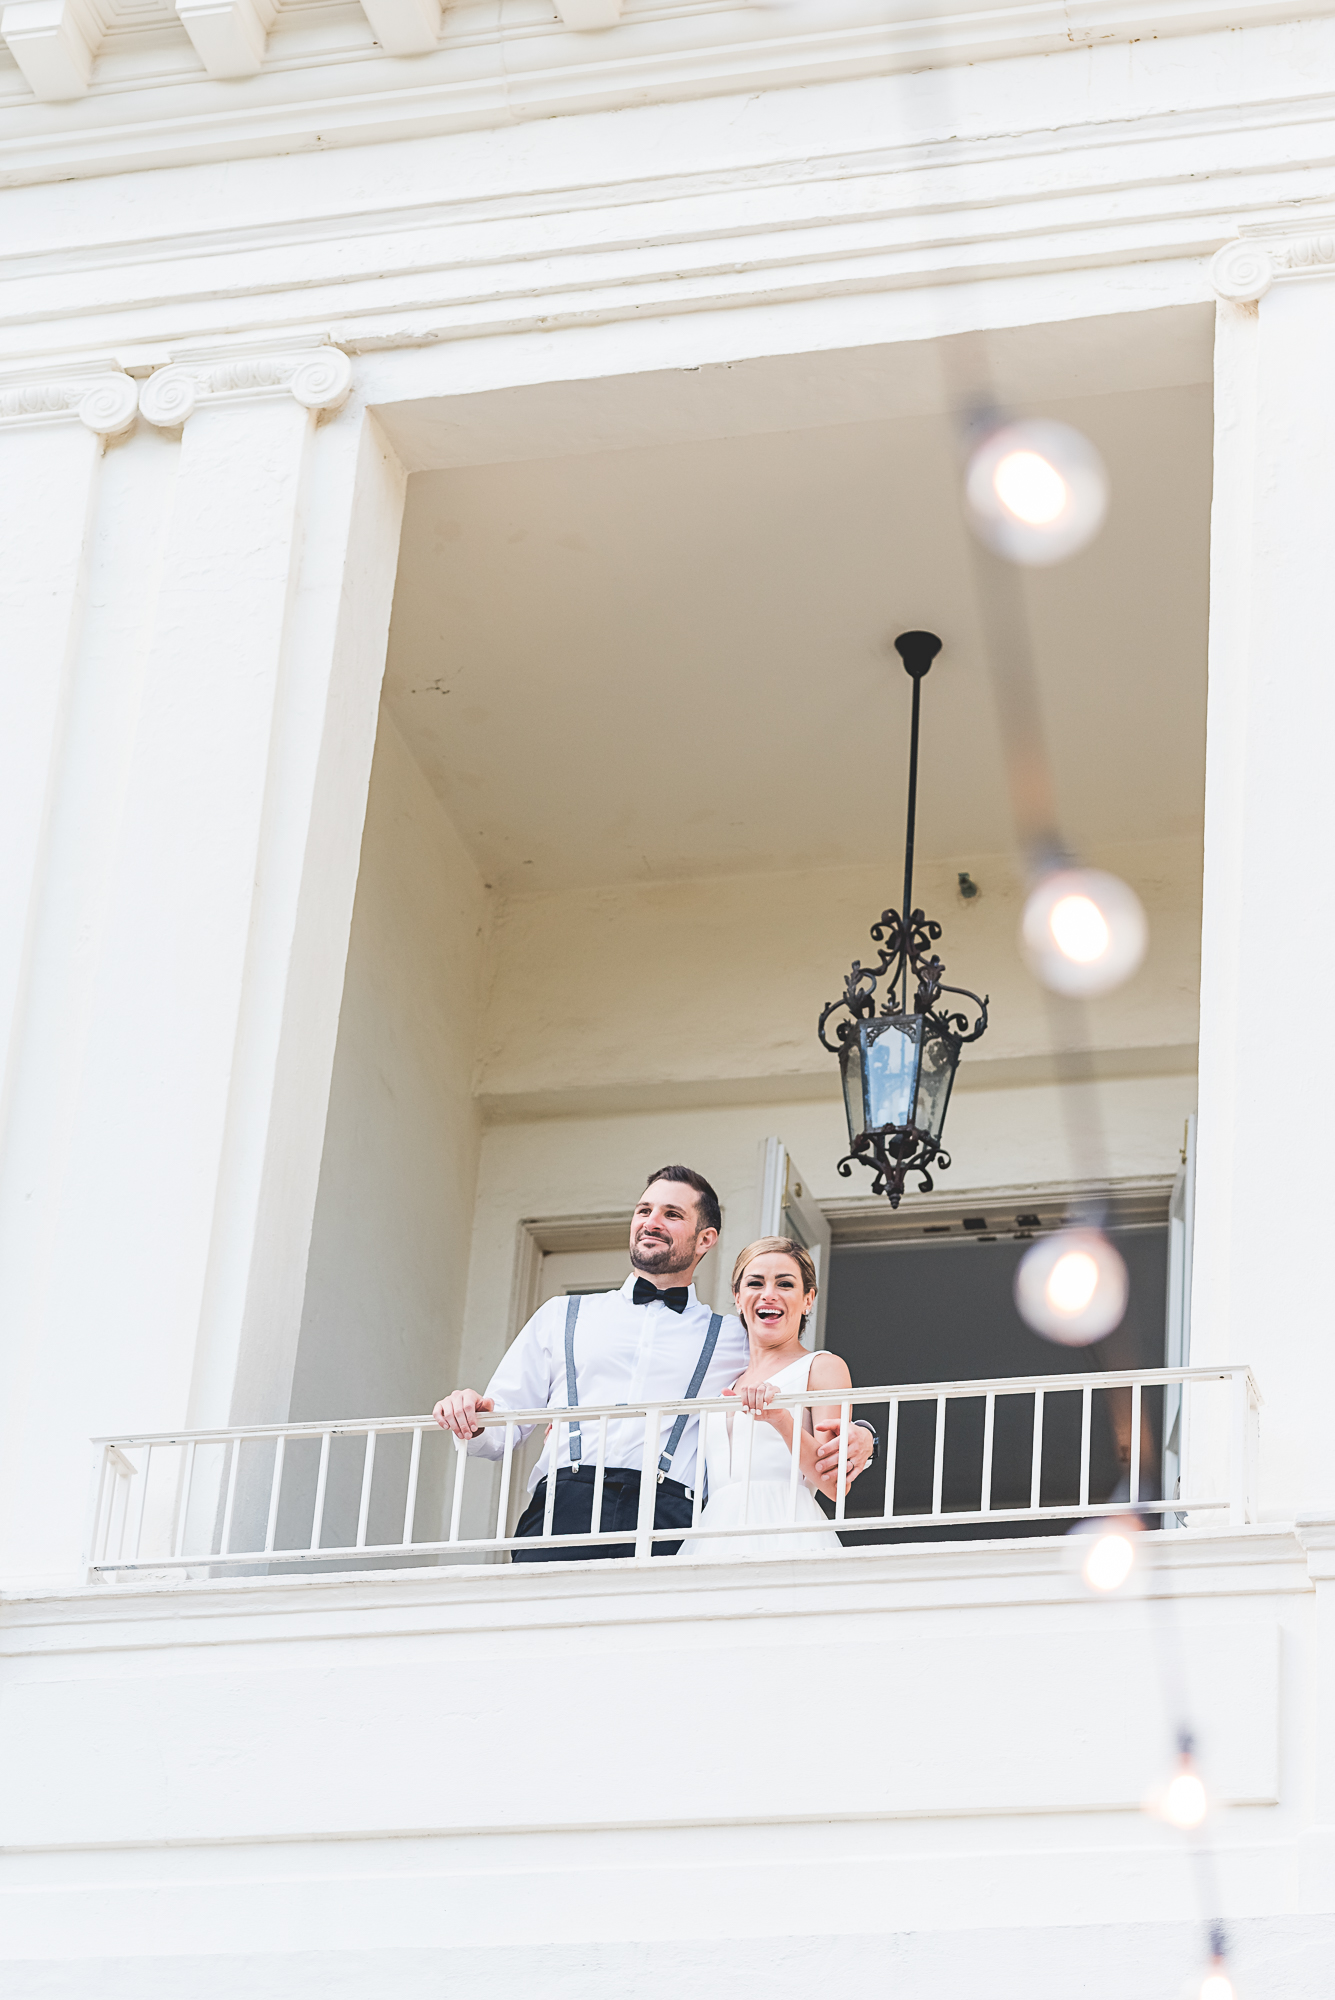 Wedding at The Wadsworth Mansion at Long Hill in Middletown CT. Bride and groom standing on a balcony looking down to their guests.